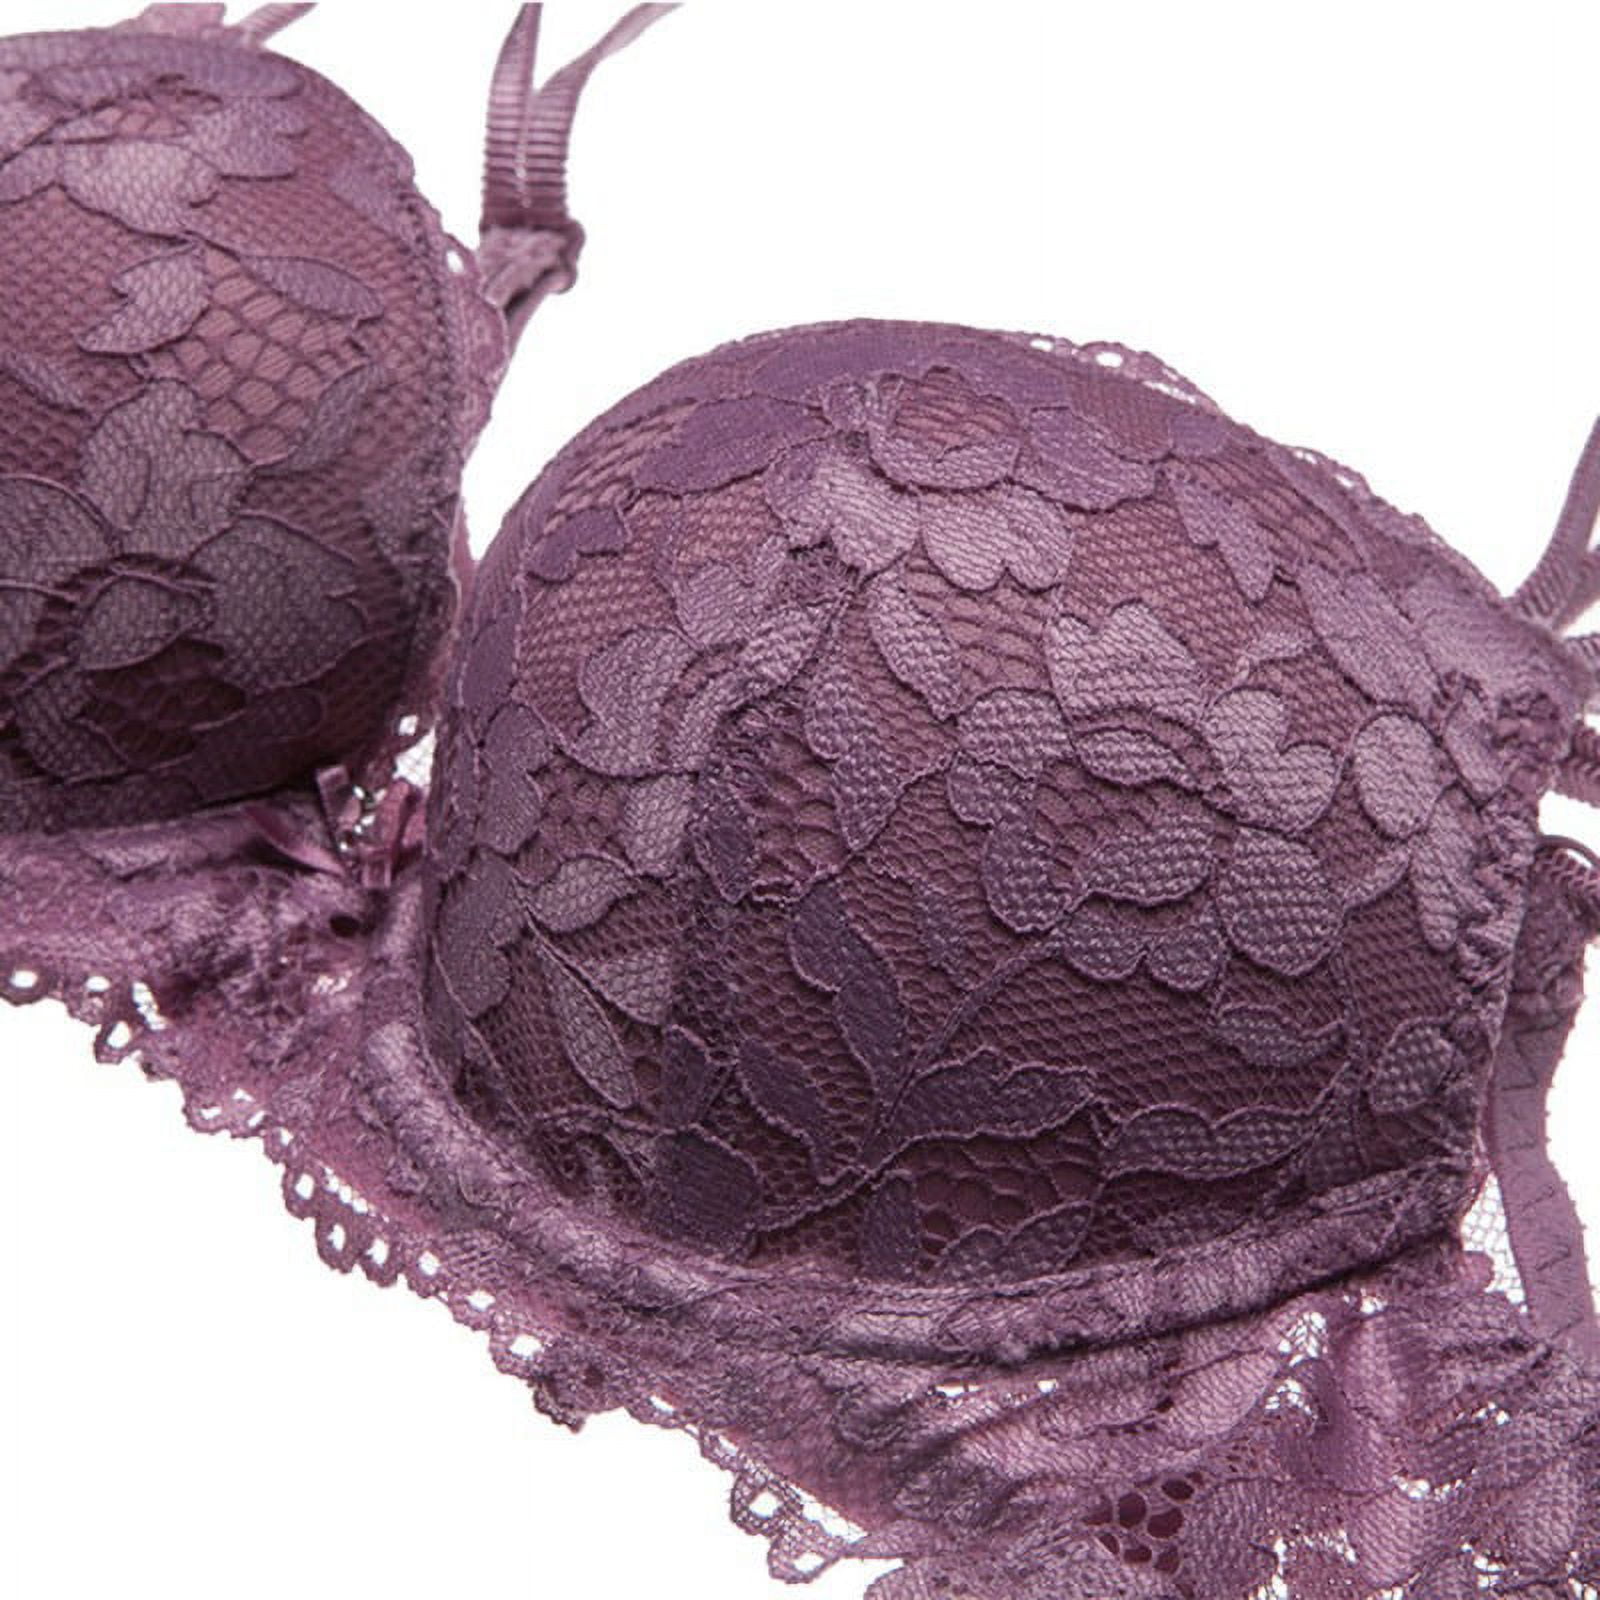 38C Beyond sexy push up bra sweet purple,special lime and 36C Velvet bra set,  Women's Fashion, New Undergarments & Loungewear on Carousell